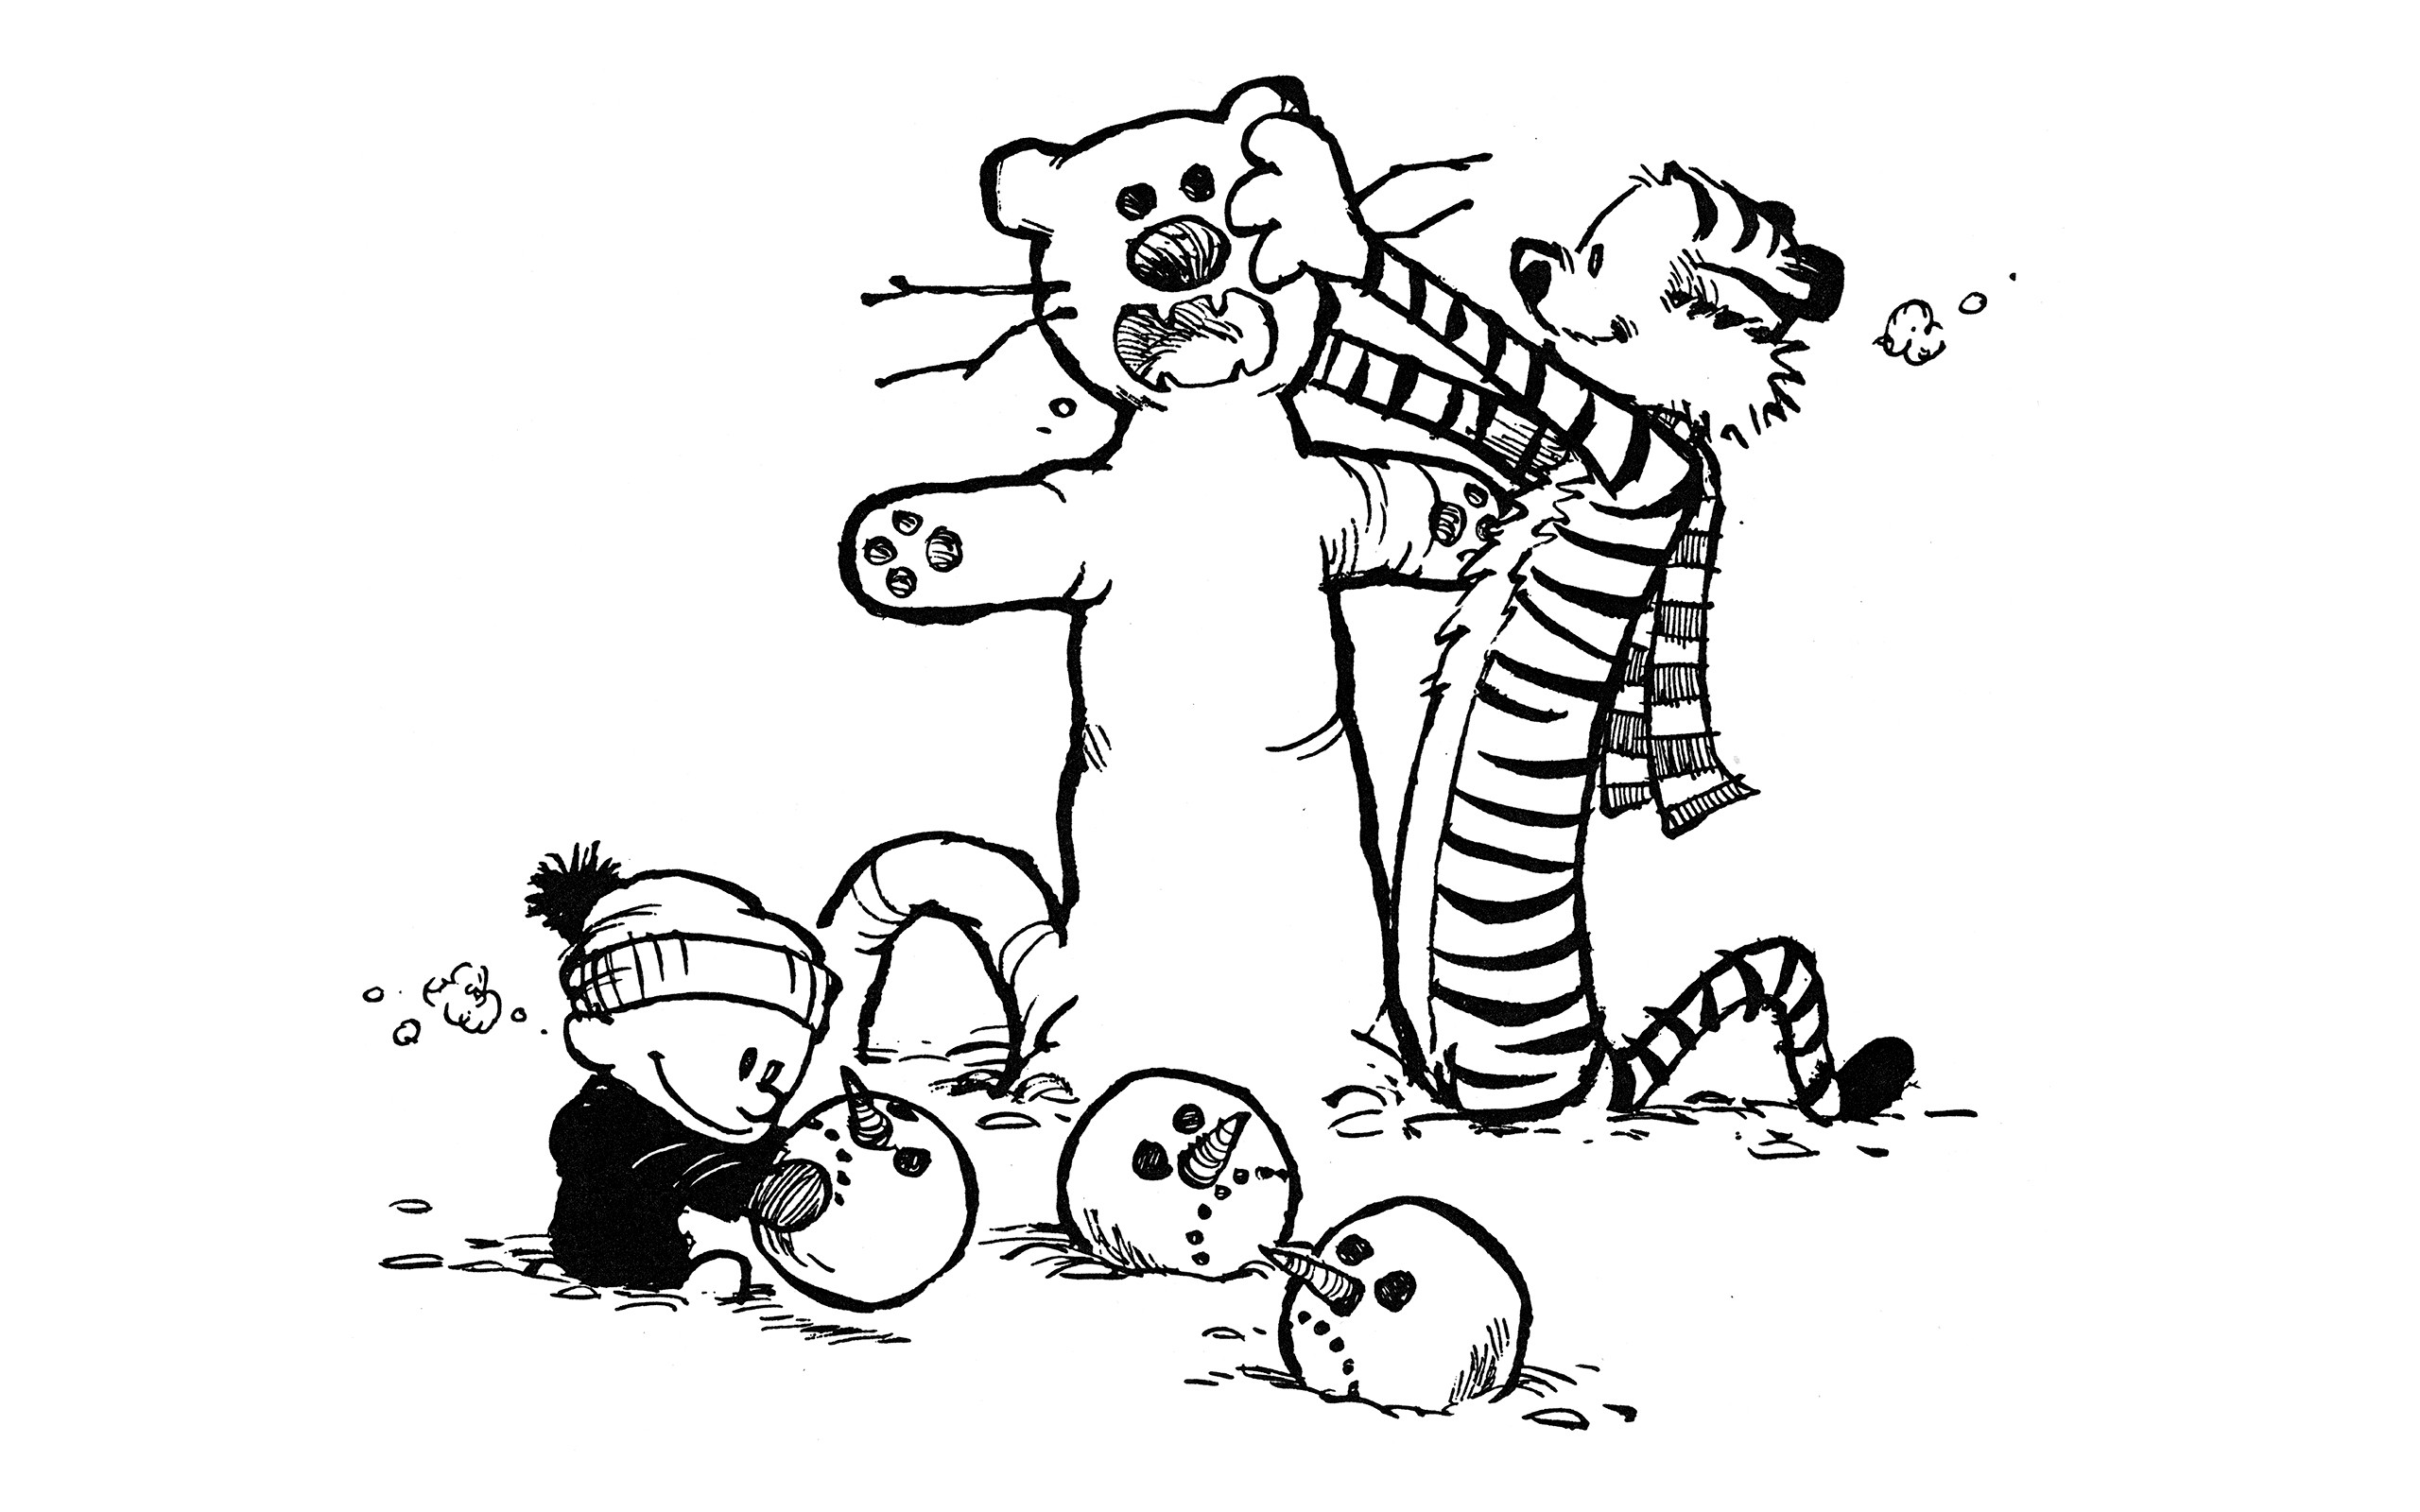 General 2560x1600 Calvin and Hobbes comics simple background cartoon white background